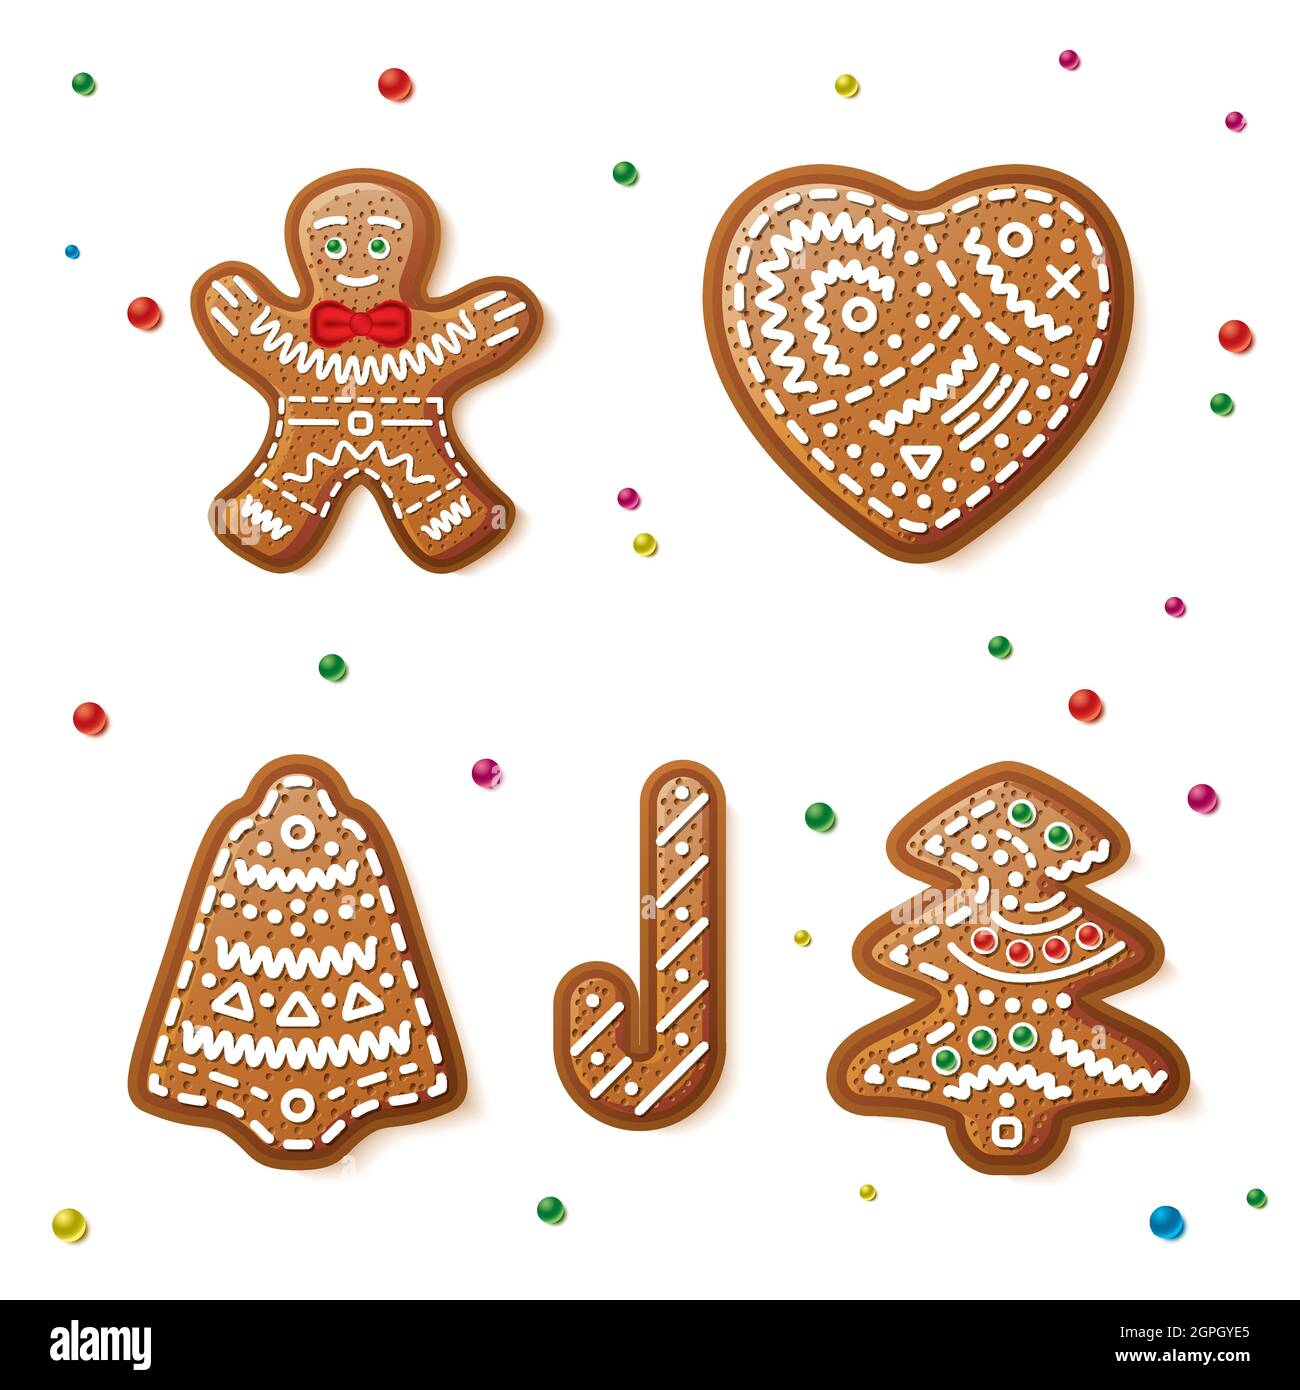 Set of Gingerbread Christmas Cookies Isolated on White Background. Vector Illustration. Christmas Tree, Bell, Gingerbread Man, Heart and Candy. Stock Vector